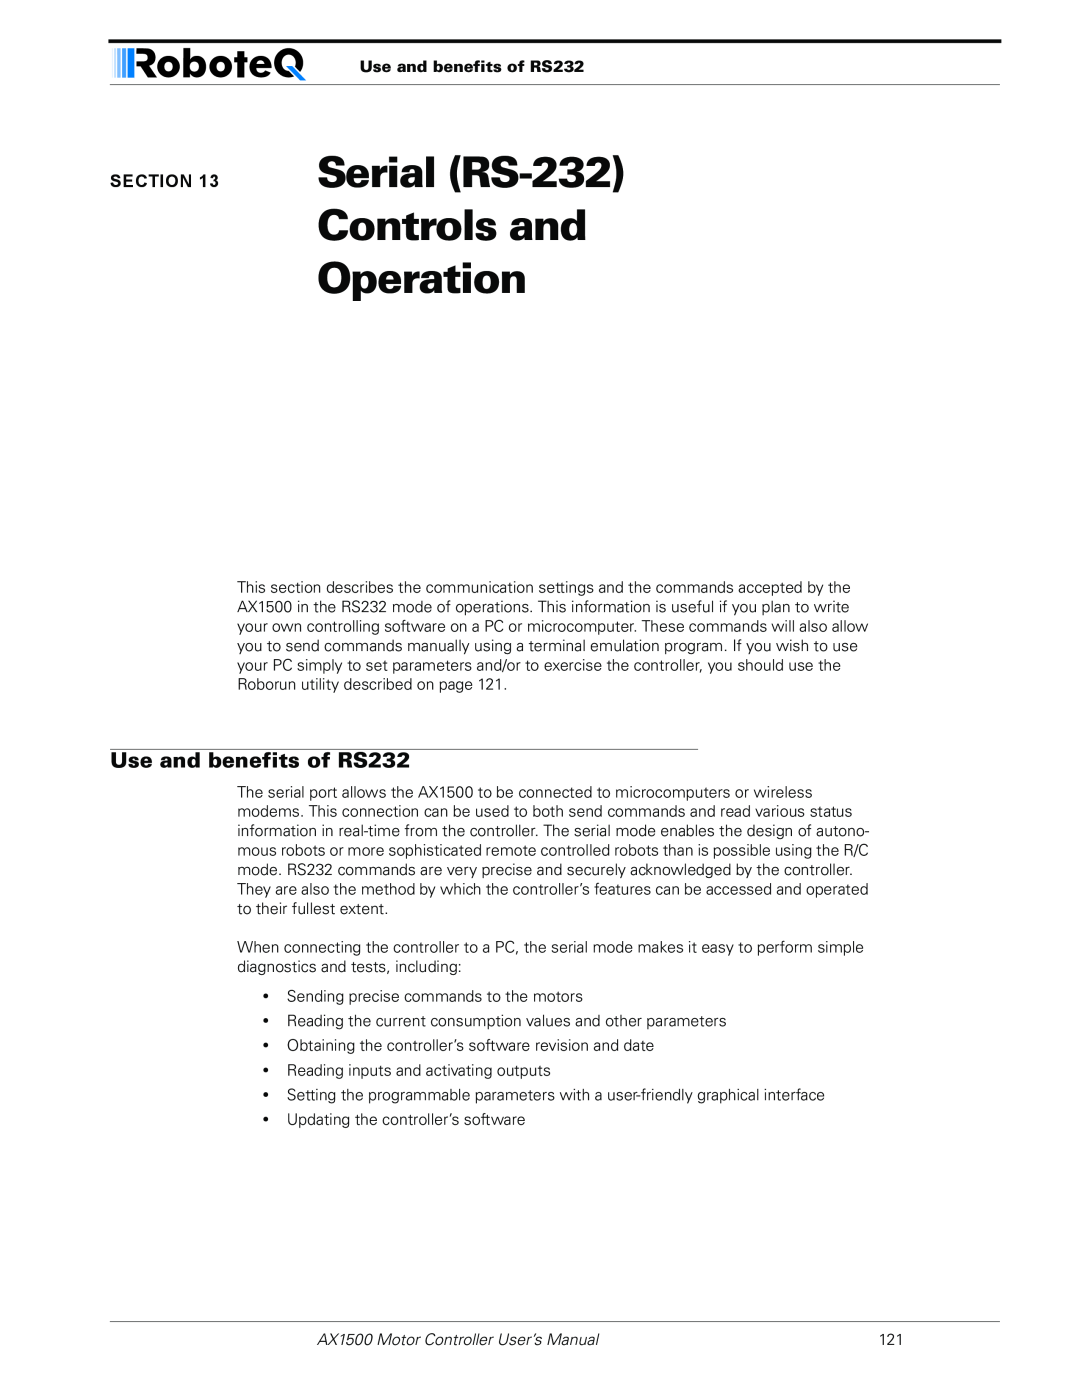 RoboteQ AX2550 Serial RS-232 Controls and Operation, Use and benefits of RS232, AX1500 Motor Controller User’s Manual 